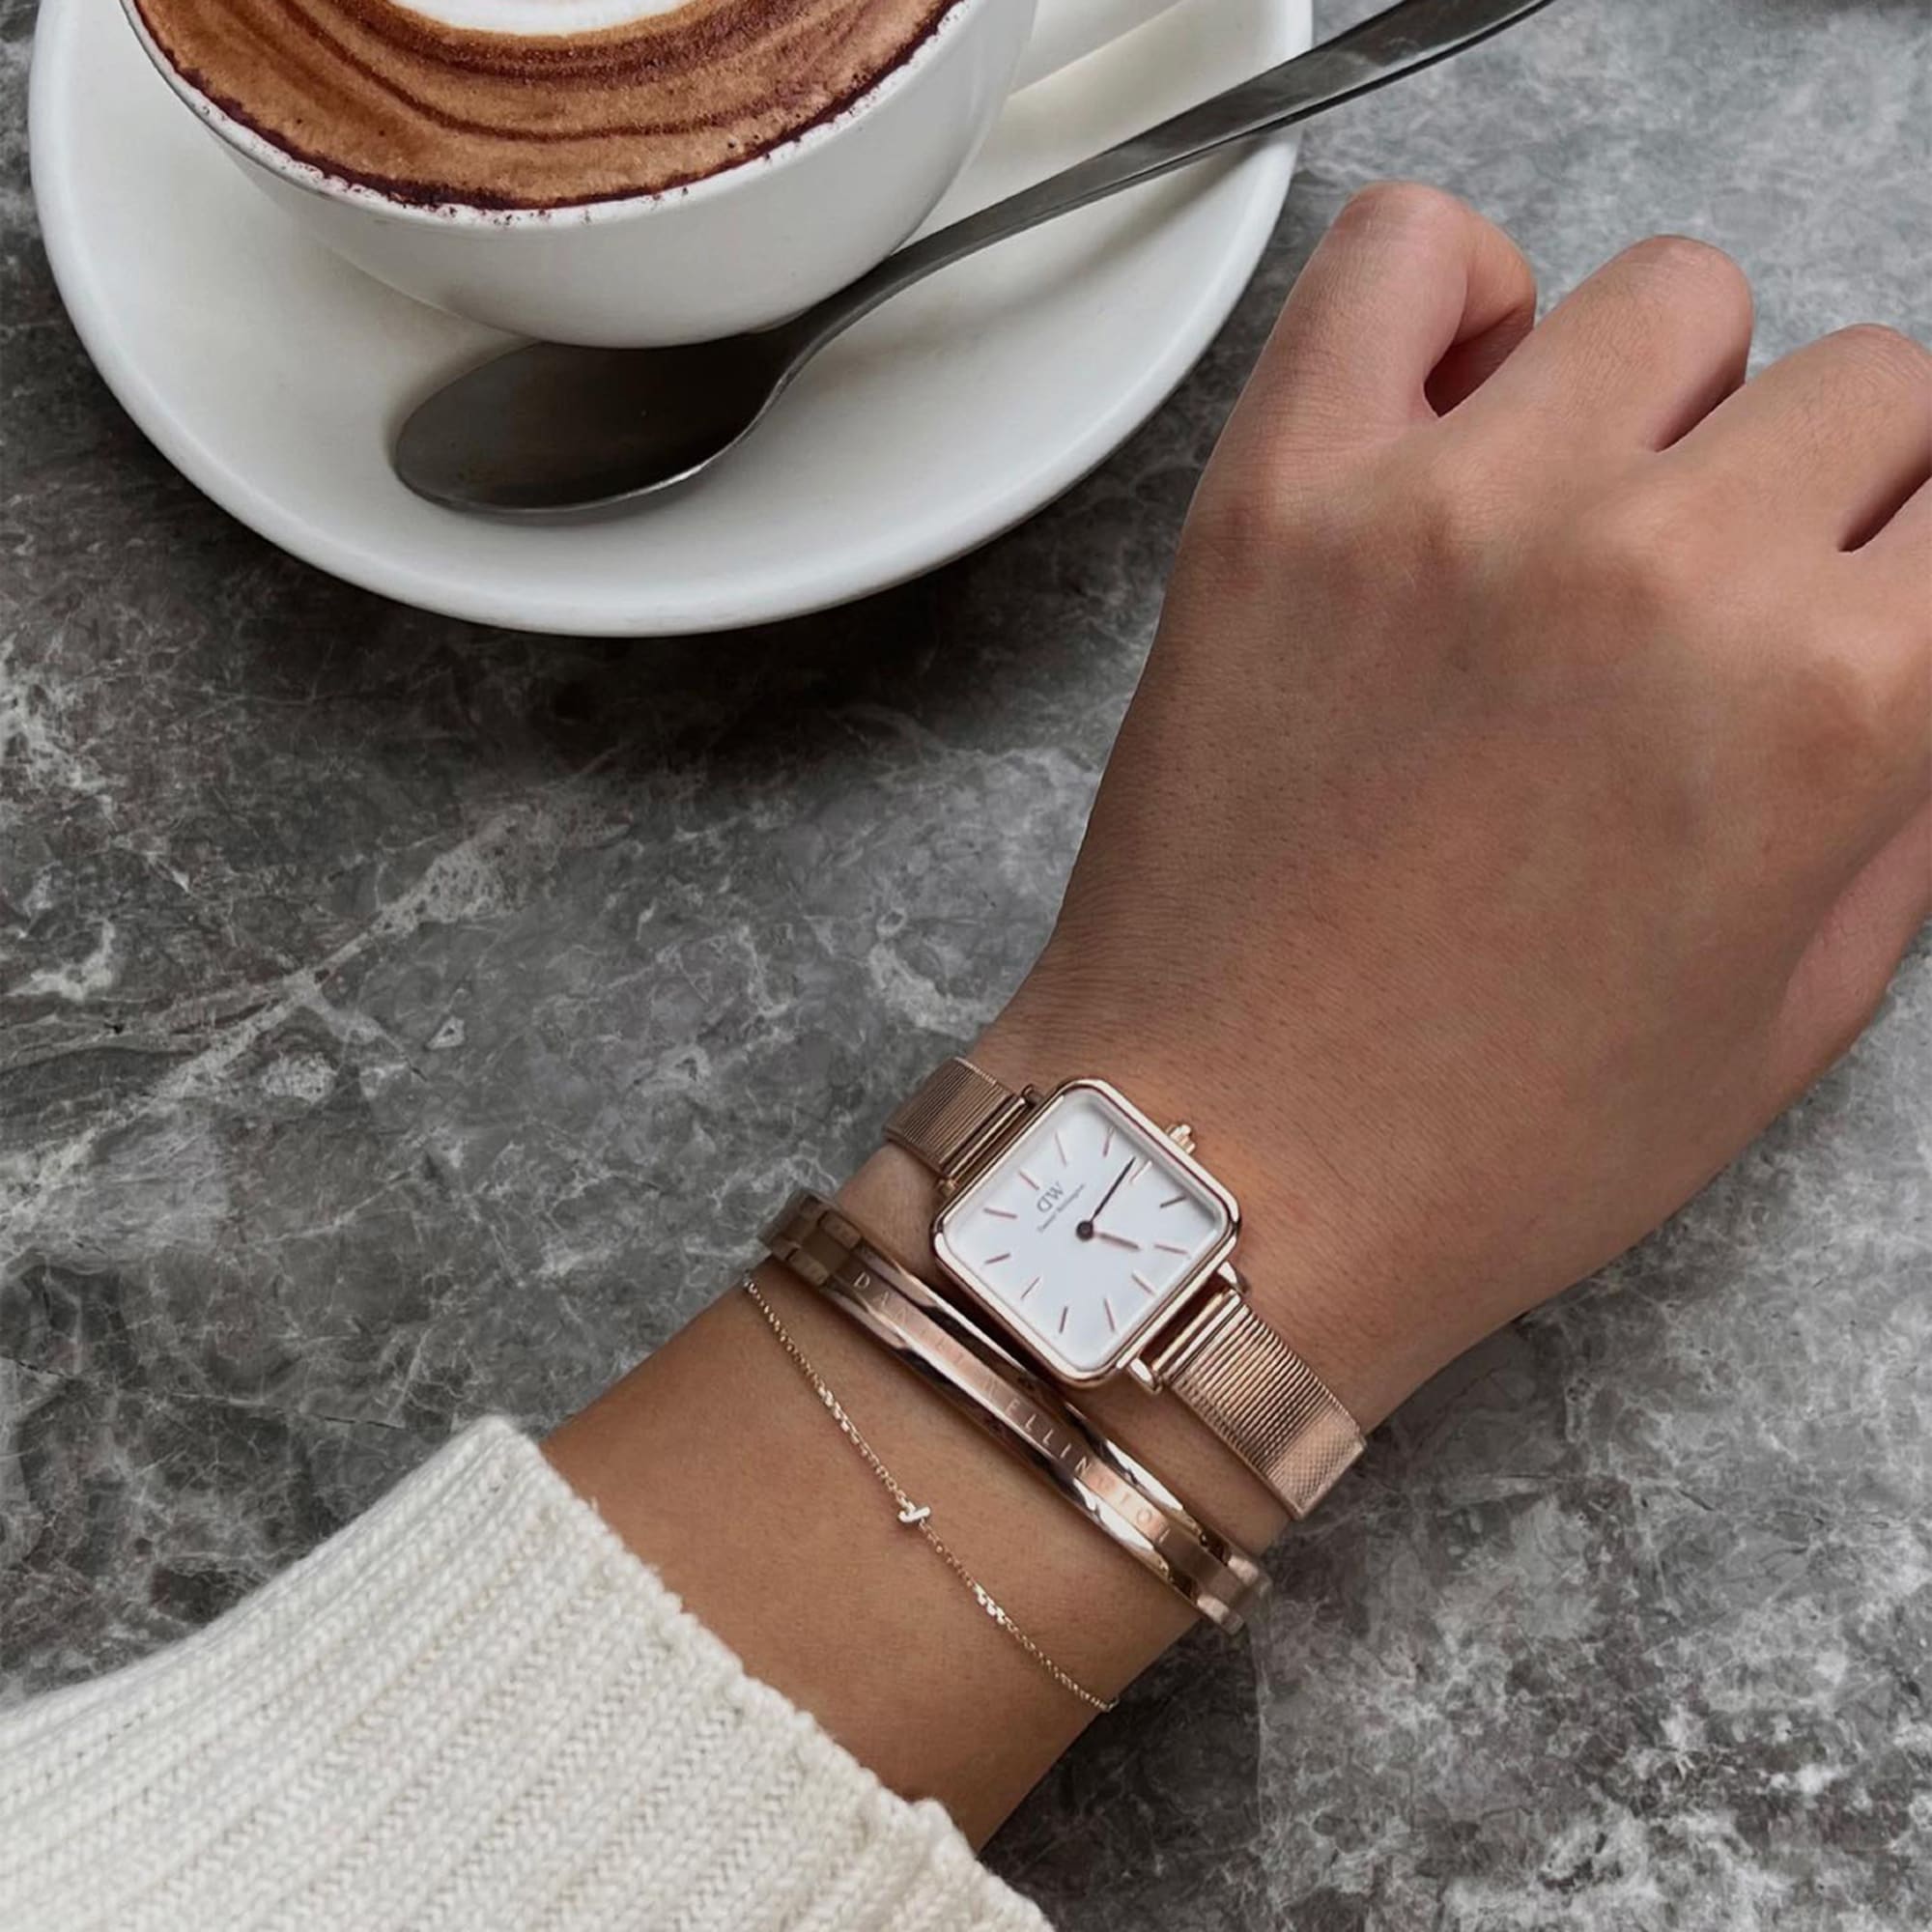 Quadro Mini - Watches for women in rose gold & gold | DW